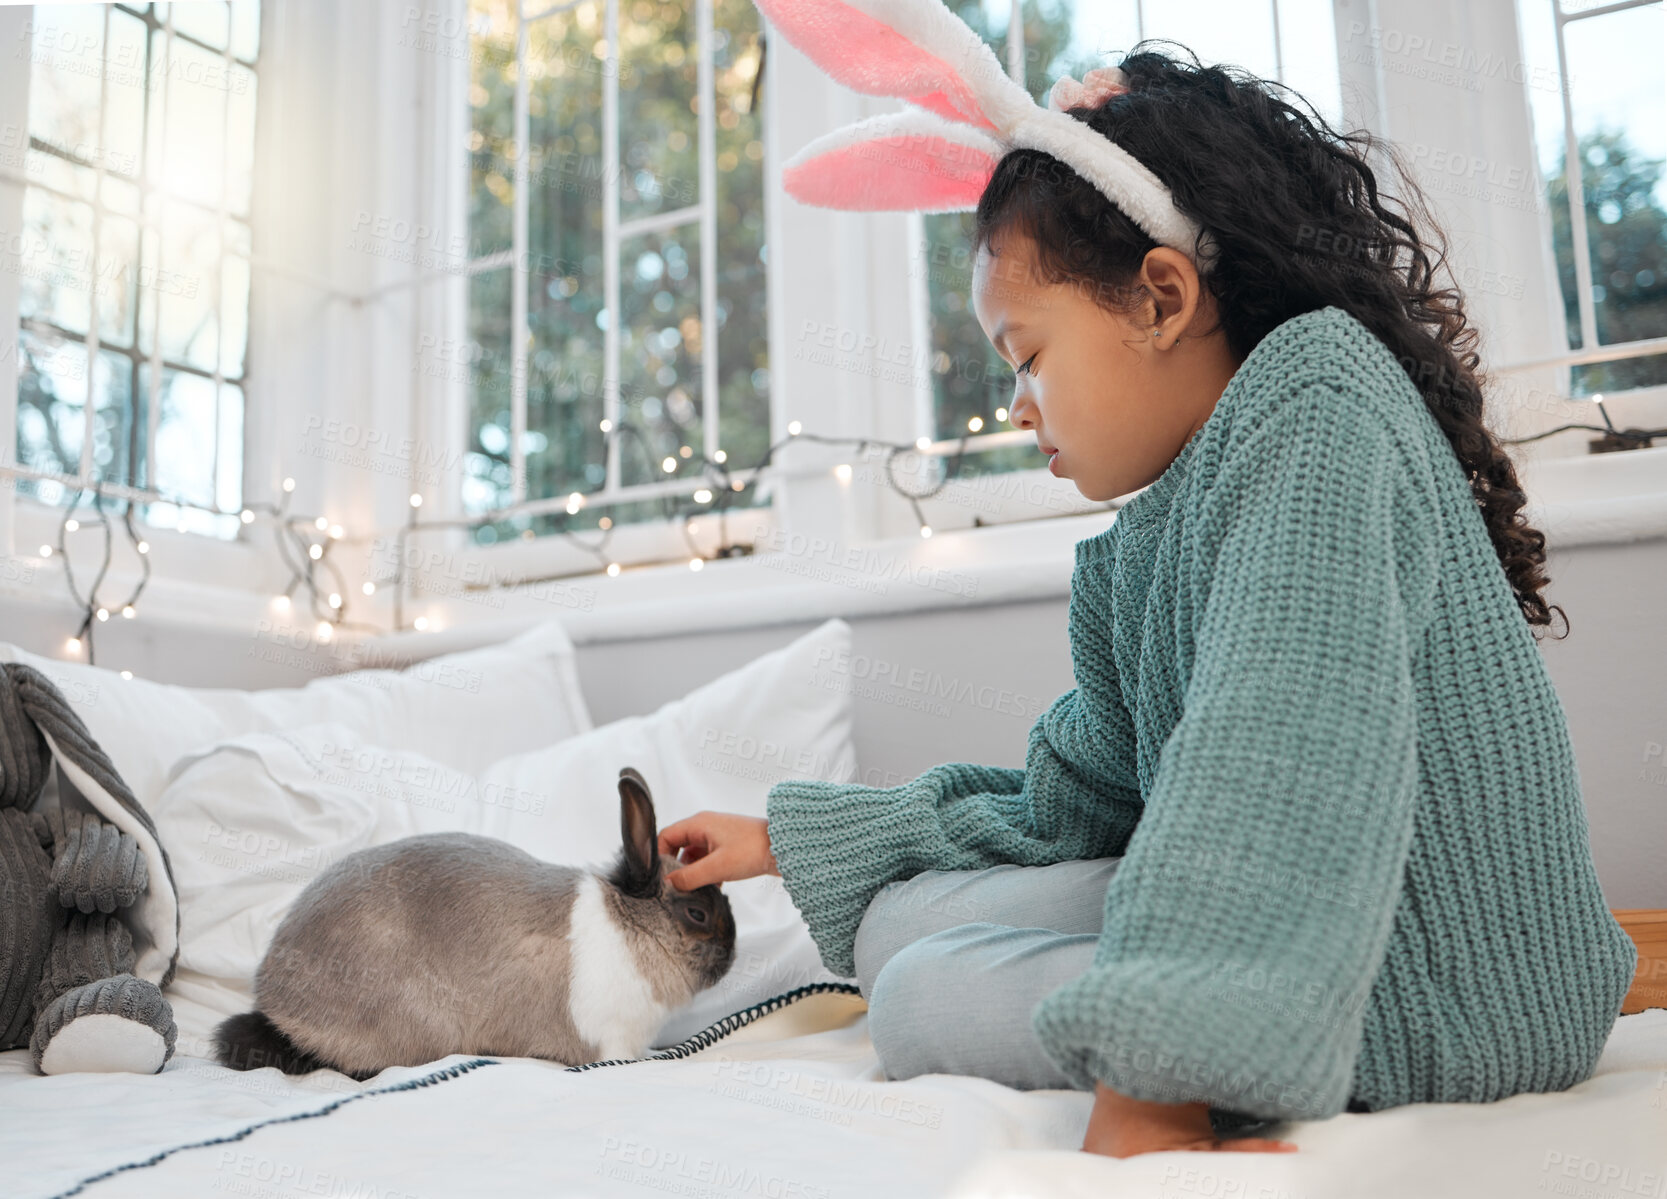 Buy stock photo Shot of an adorable little girl sitting on her bed and bonding with her pet rabbit at home